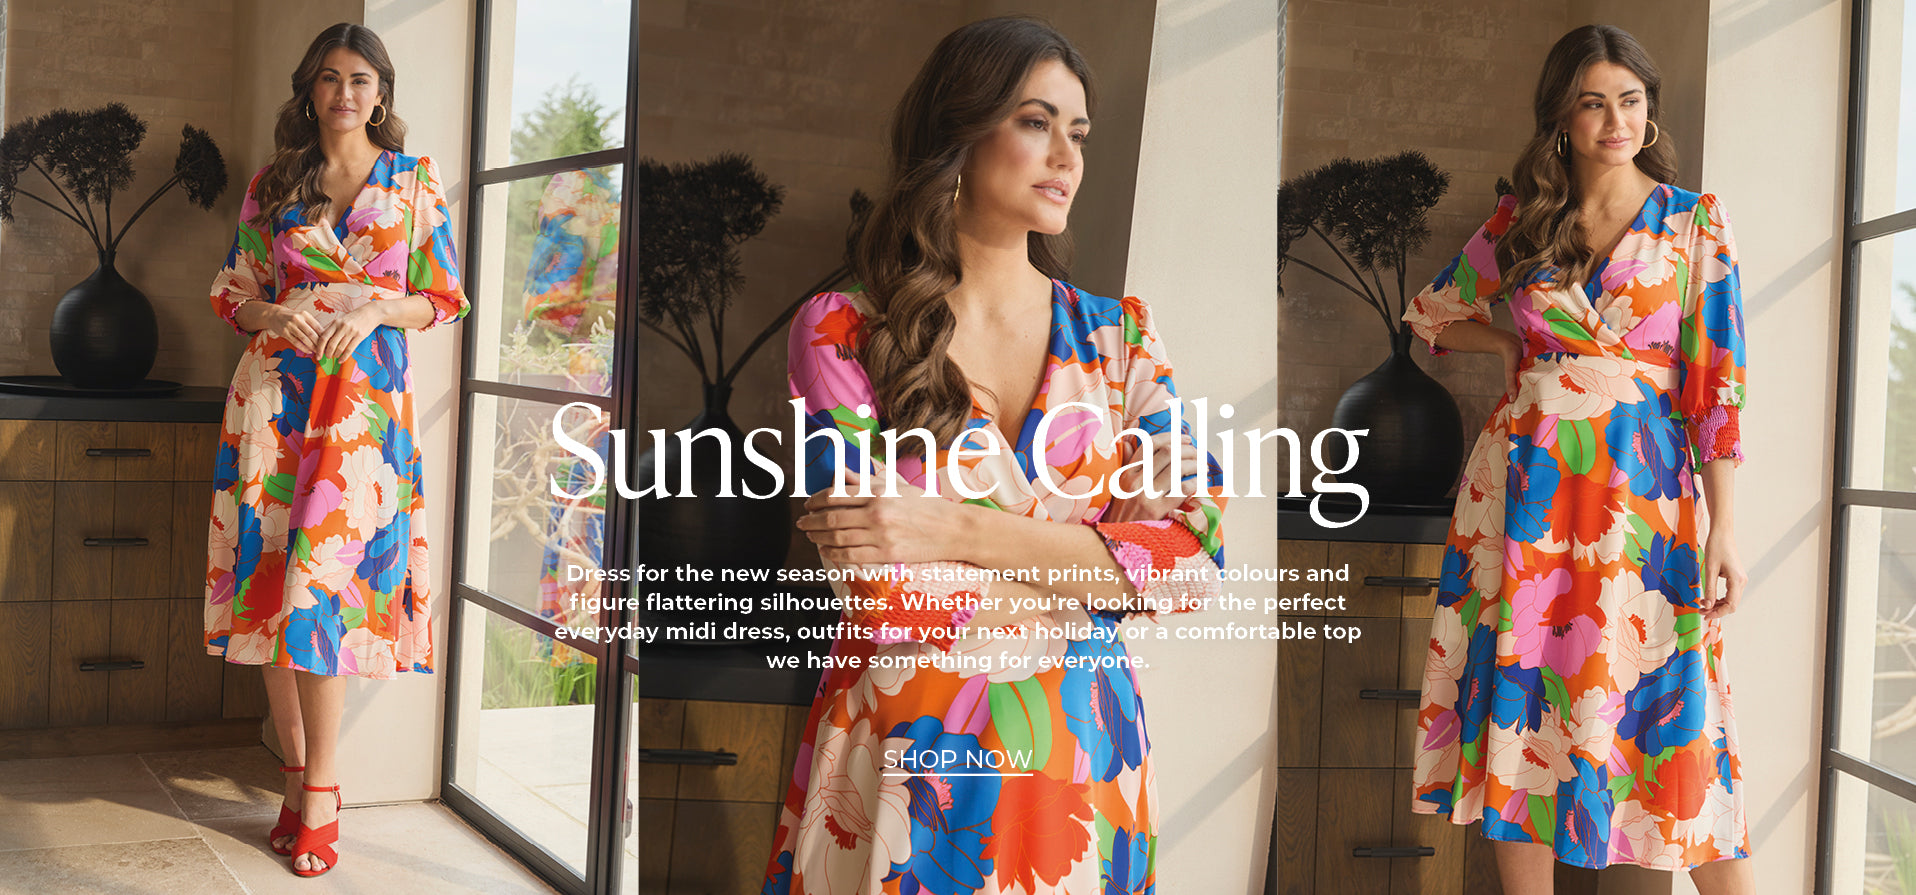 Dress for the new season with statement prints, vibrant colours and figure flattering silhouettes. Whether you're looking for the perfect everyday midi dress, outfits for your next holiday or a comfortable top we have something for everyone.